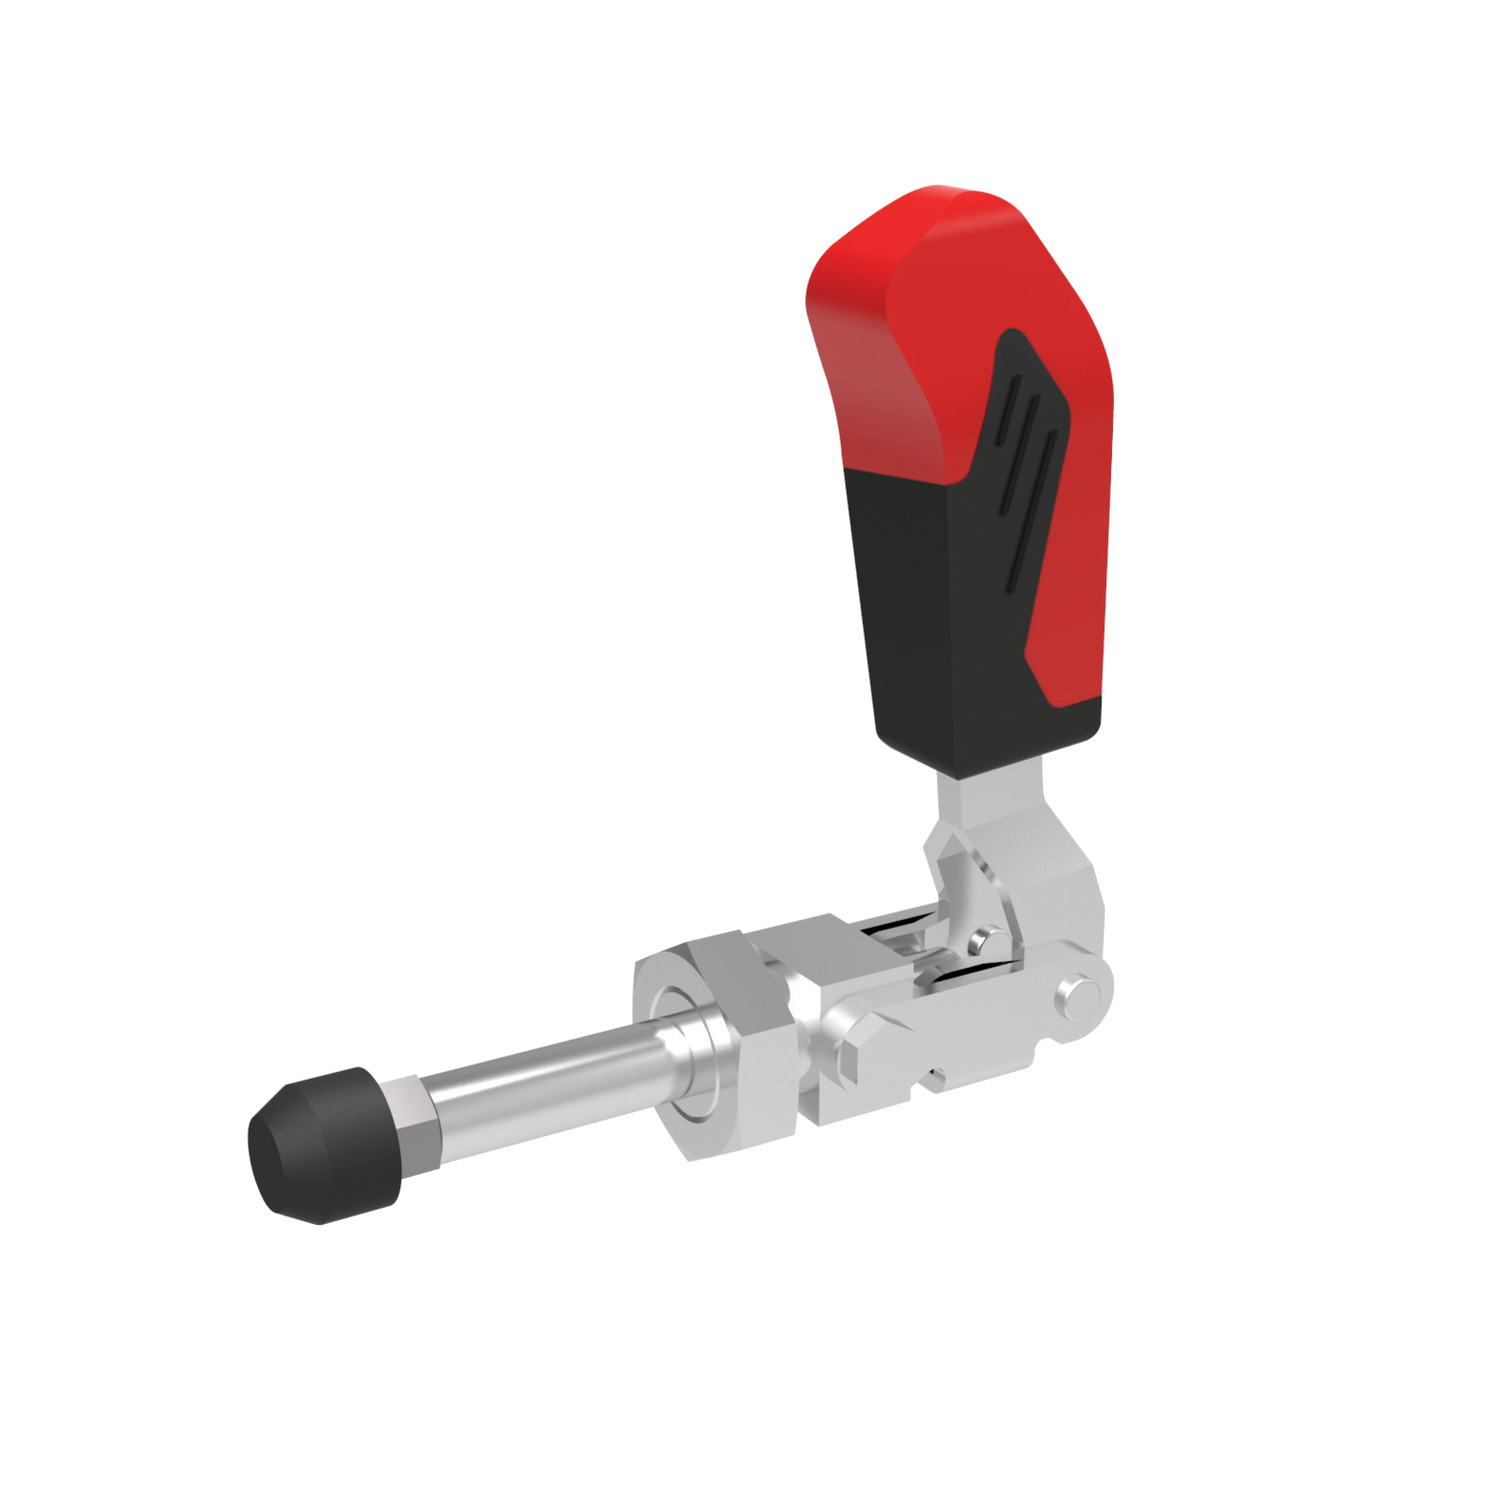 41840.1 - Push-Pull Toggle Clamps